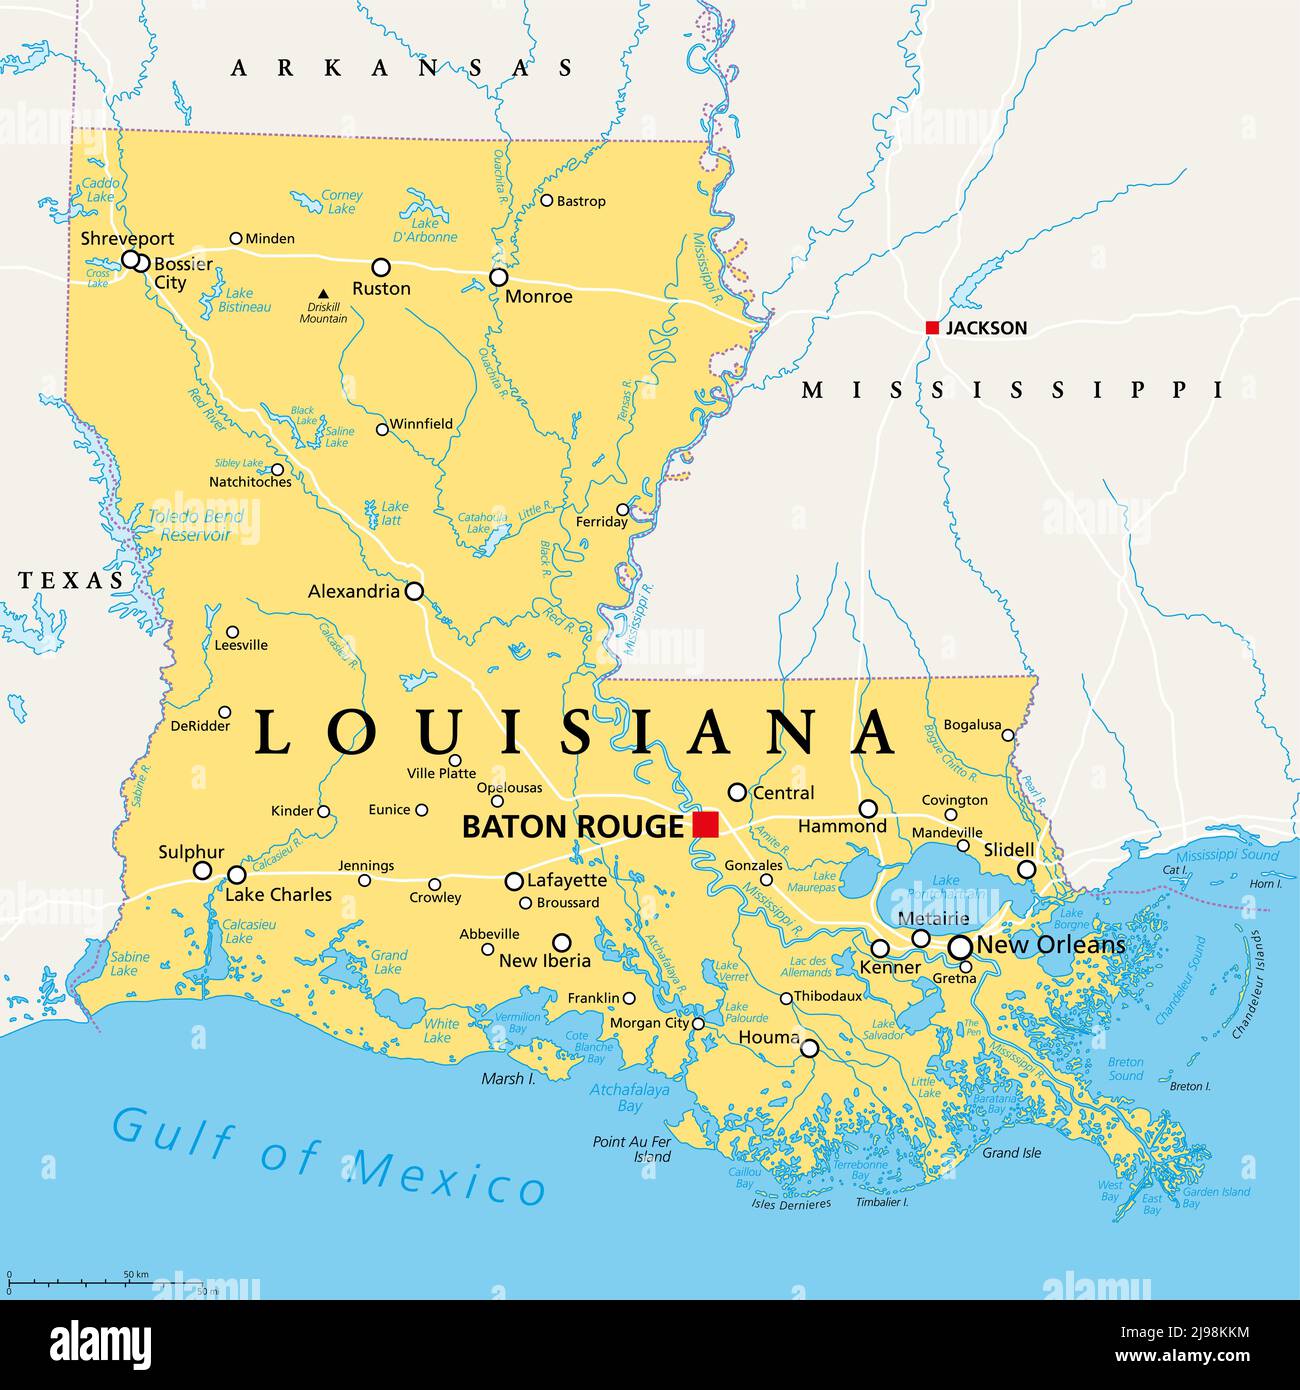 Louisiana, LA, political map, with capital Baton Rouge and metropolitan area New Orleans. State in Deep South and South Central regions of the US. Stock Photo